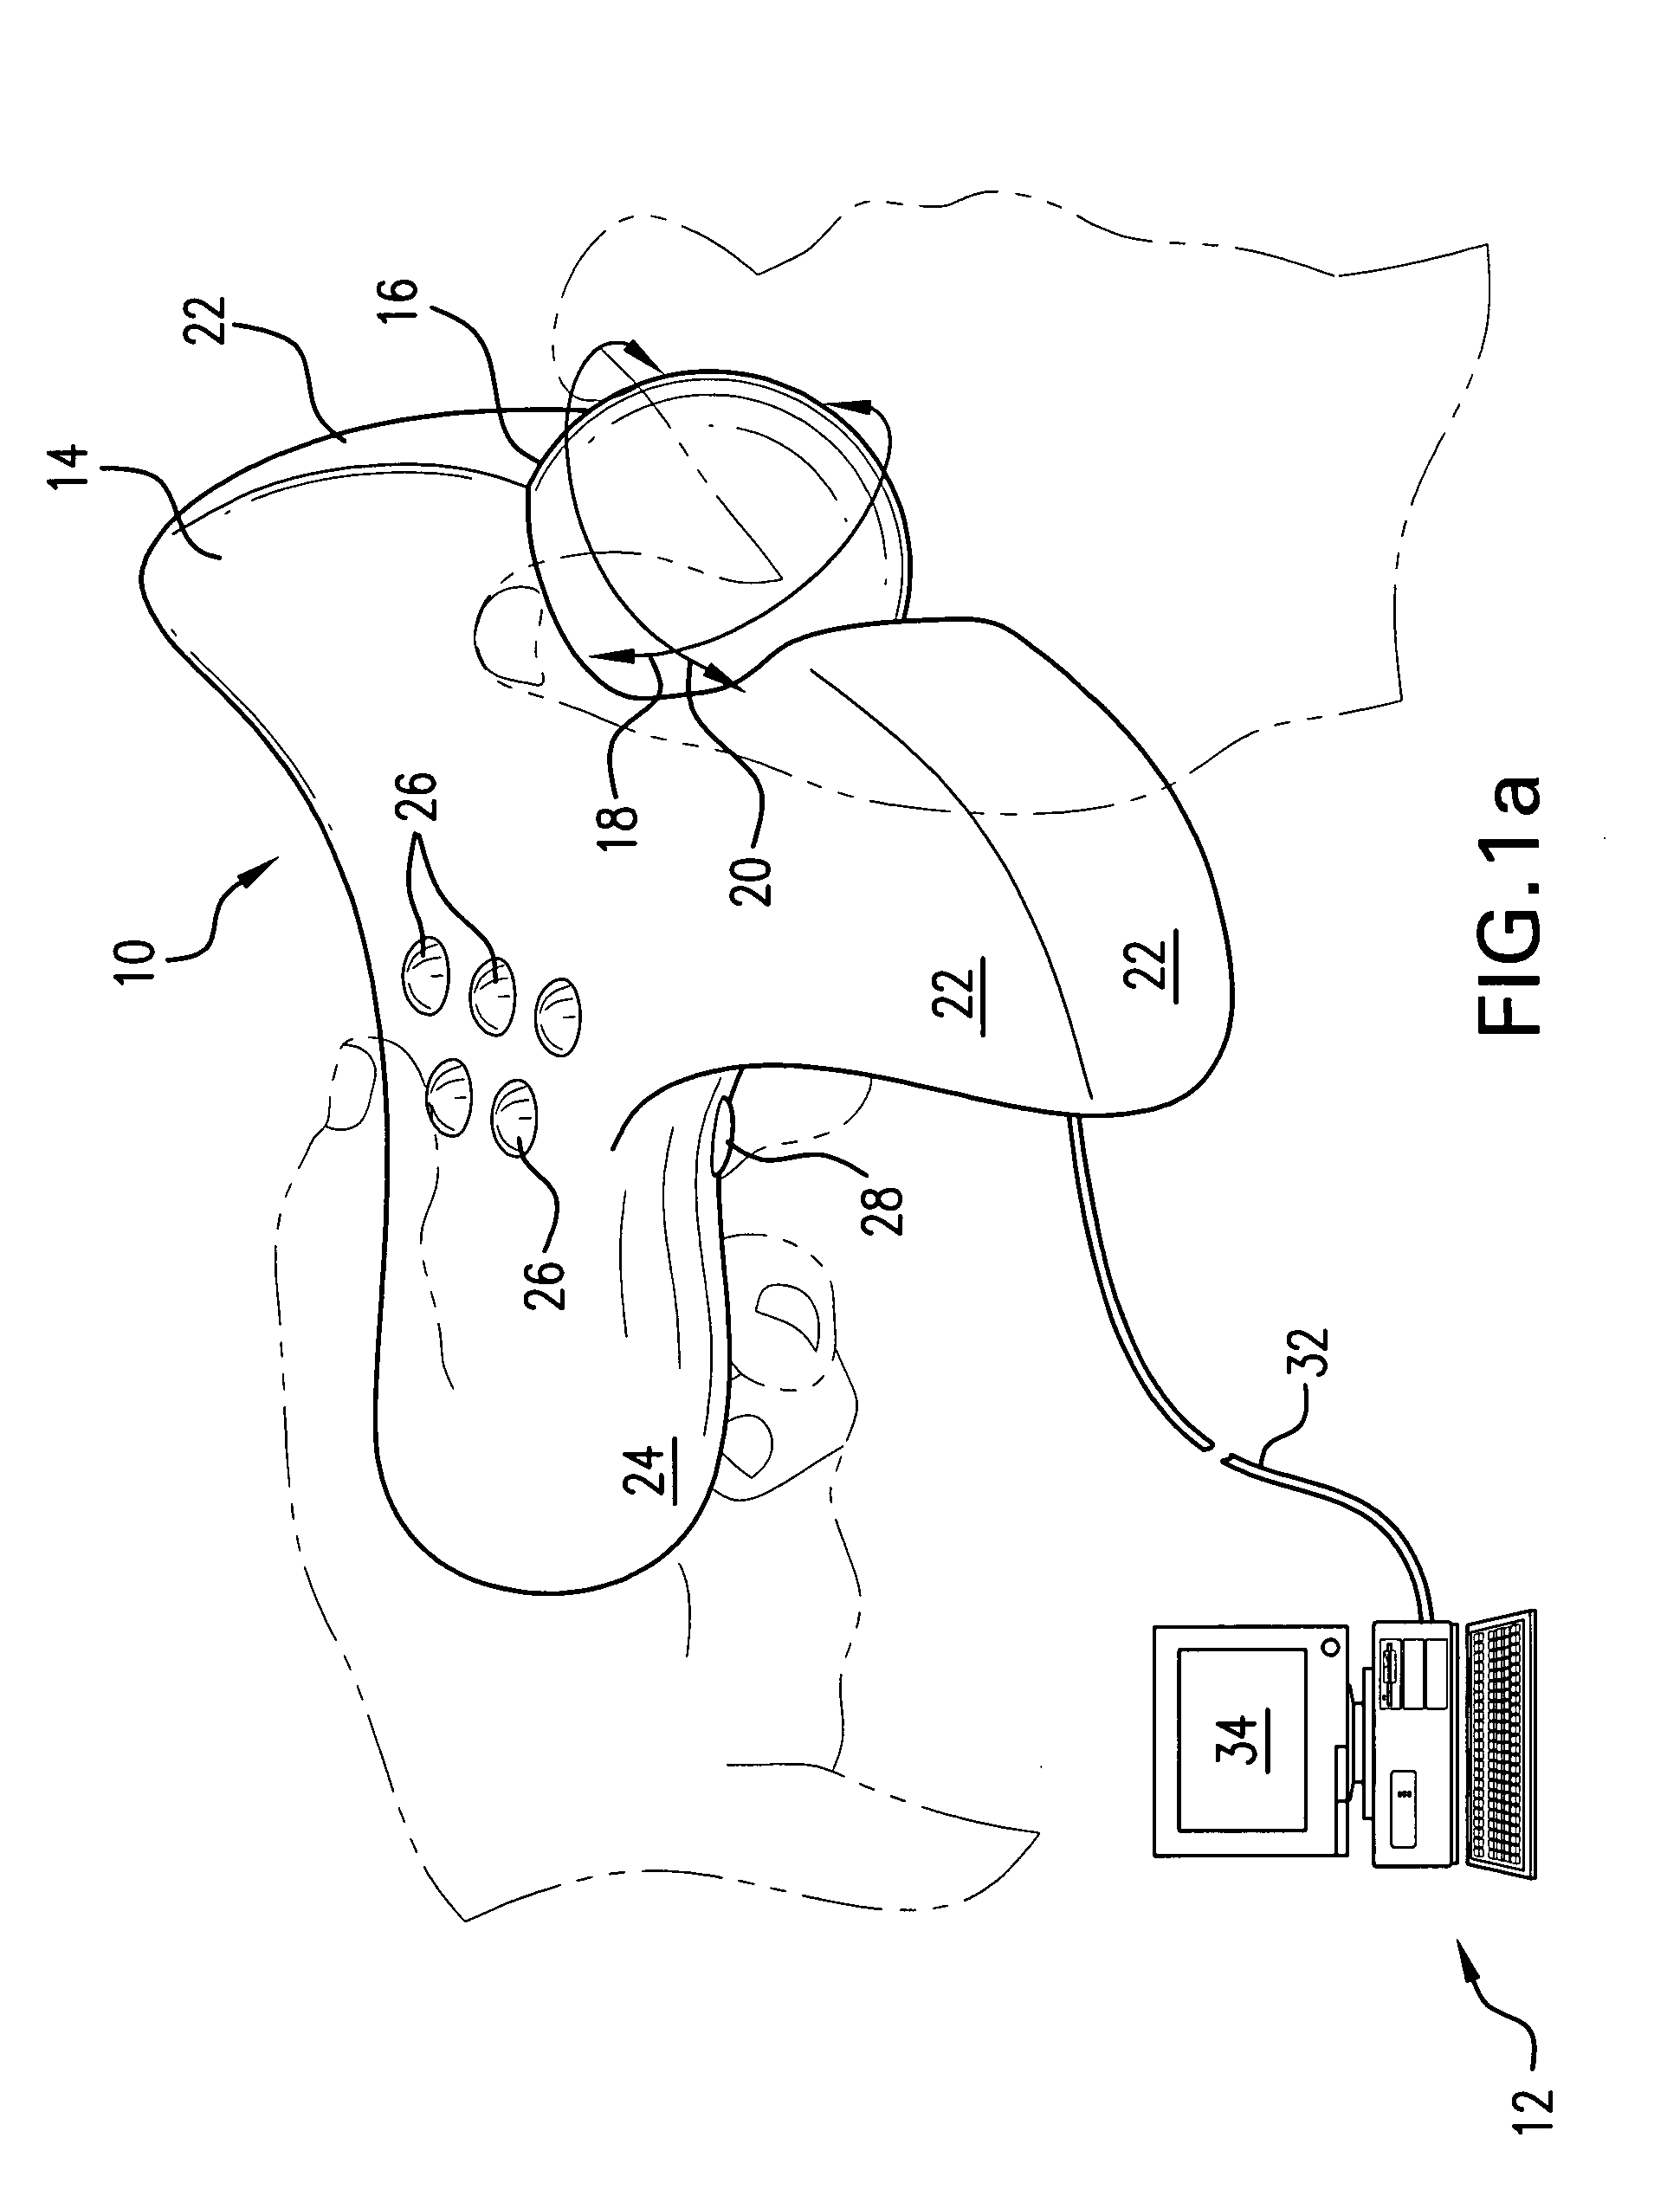 Force feedback device including single-phase, fixed-coil actuators